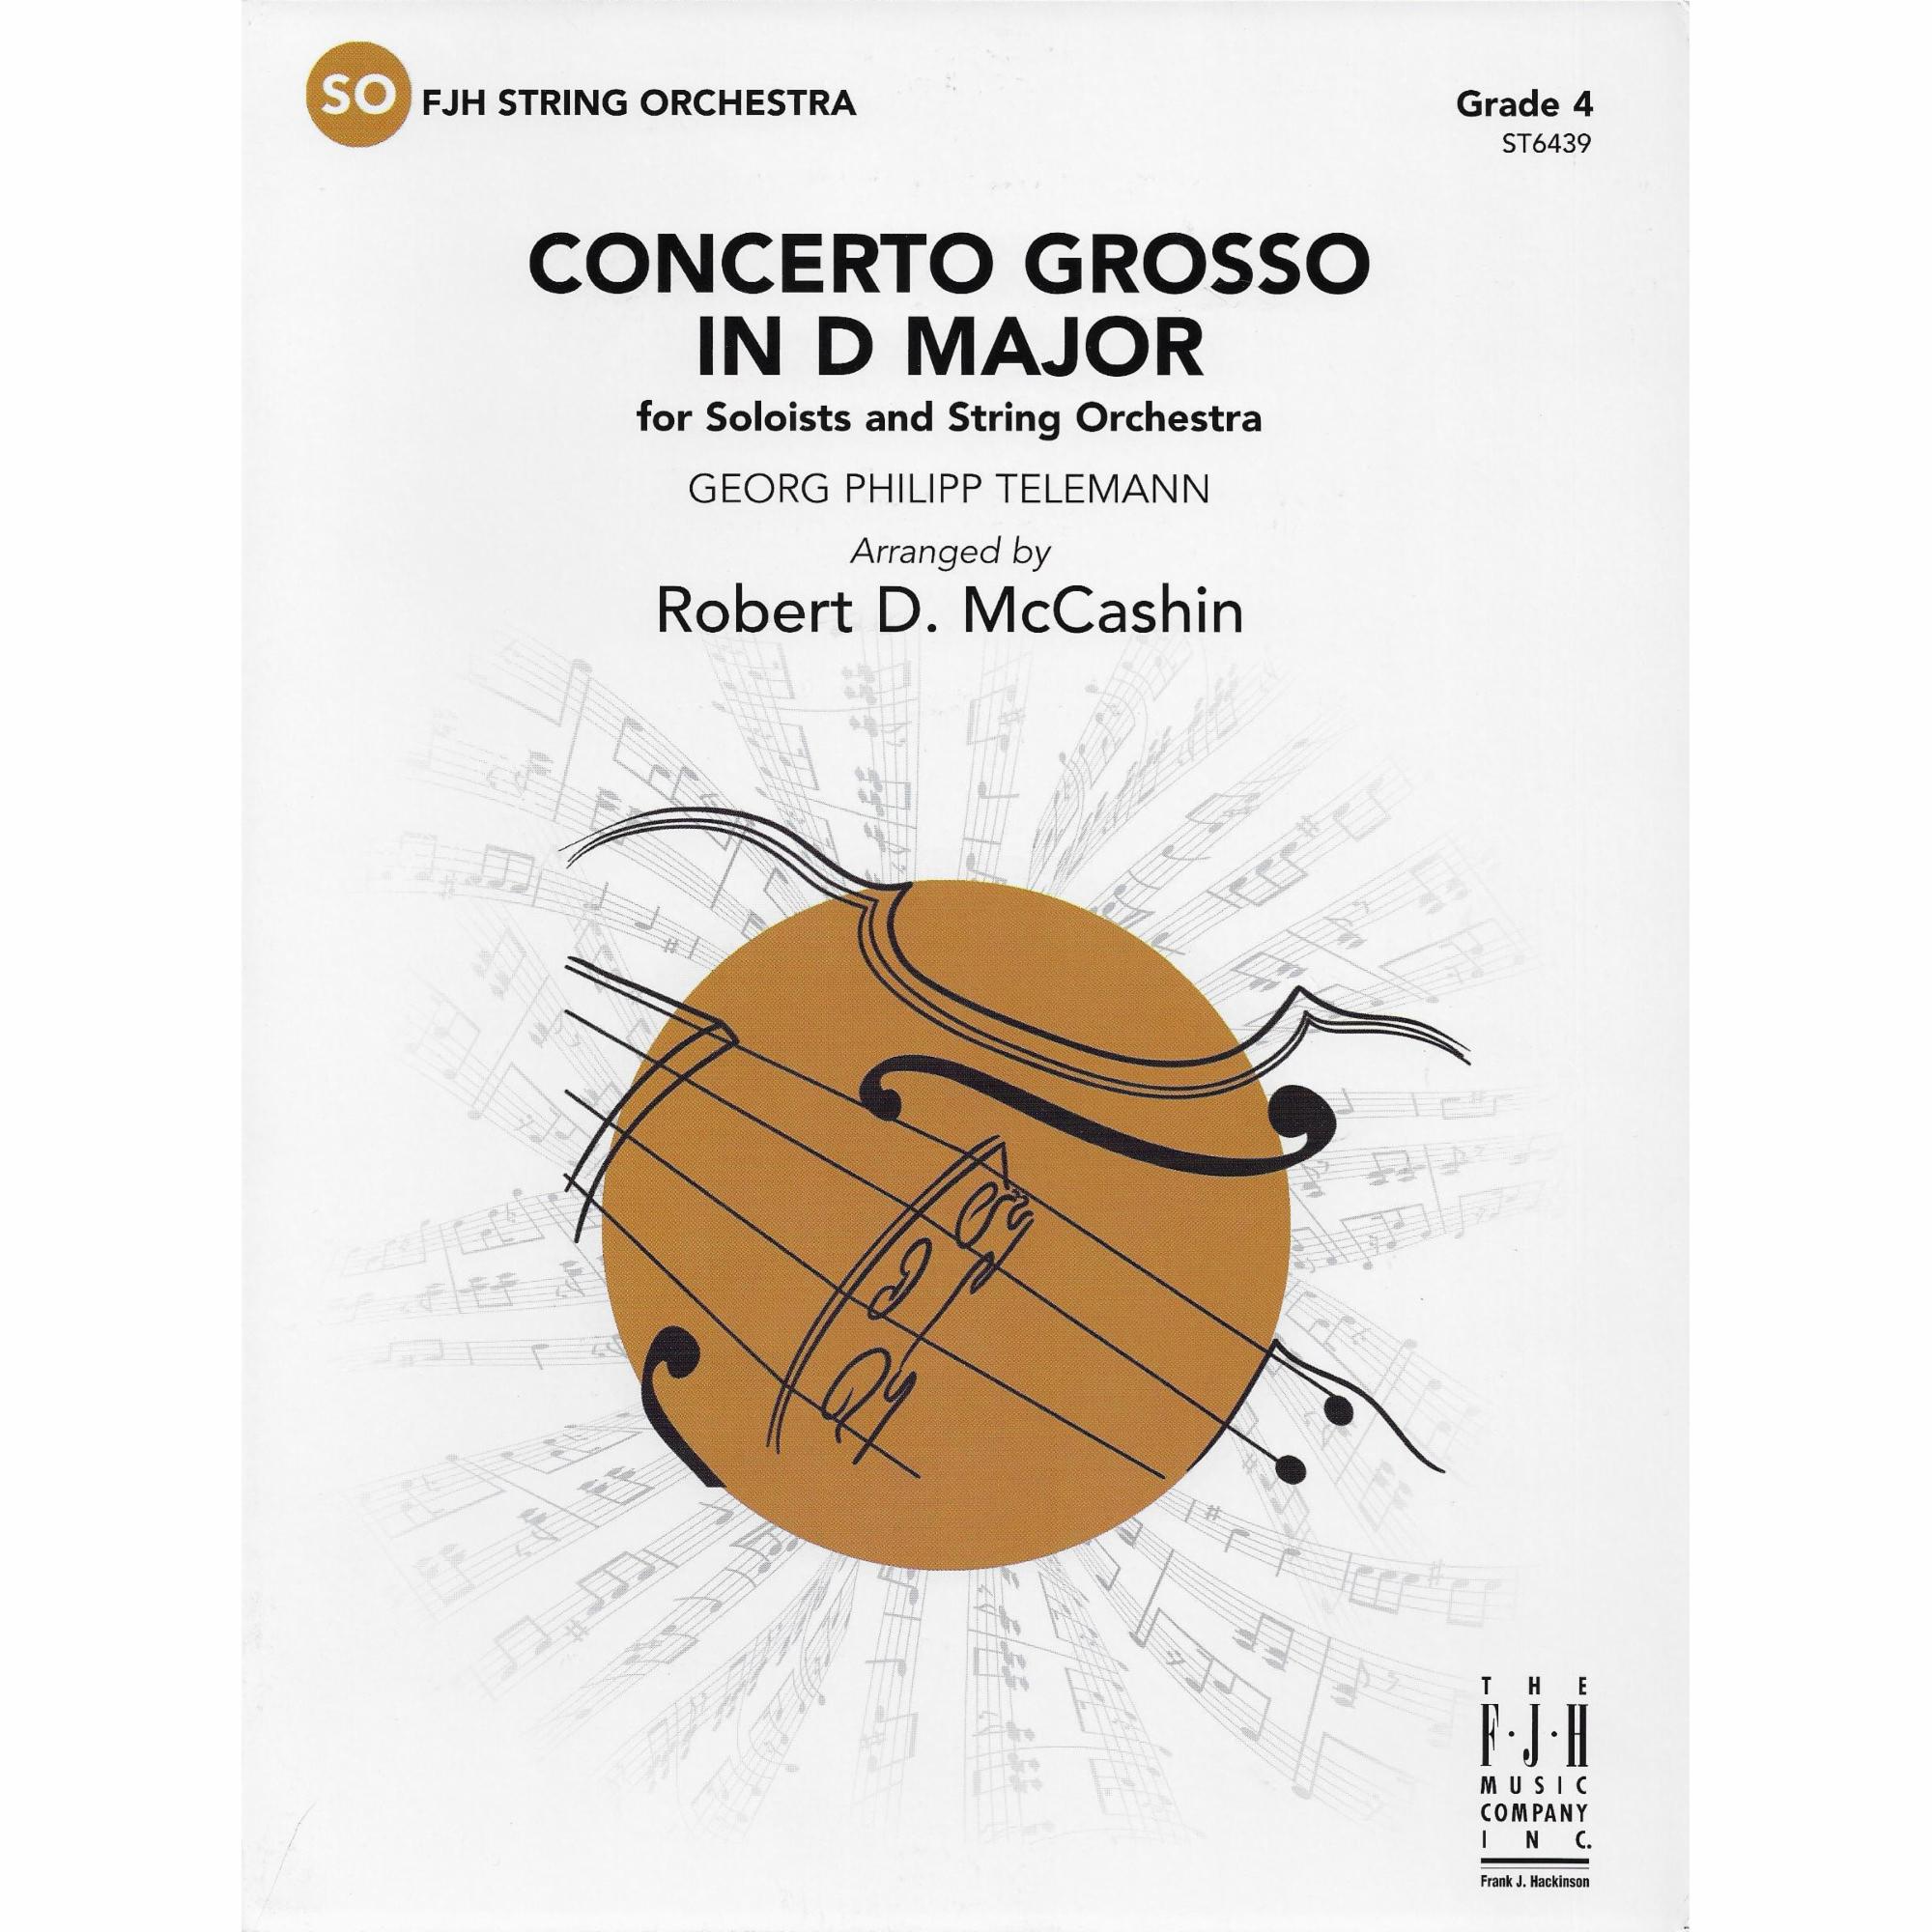 Concerto Grosso in D Major for String Orchestra